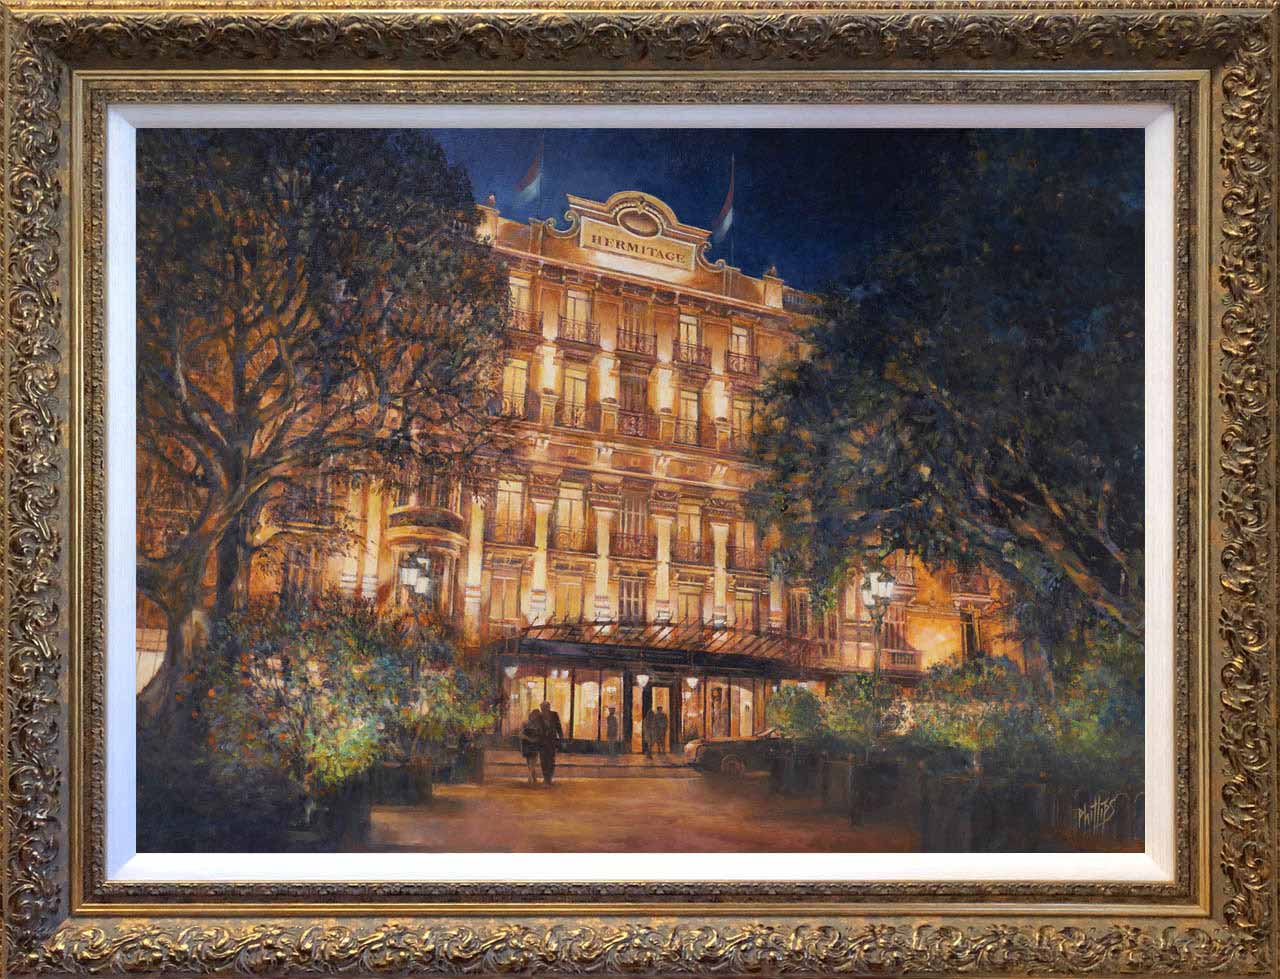 Painting of The Hermitage by Night